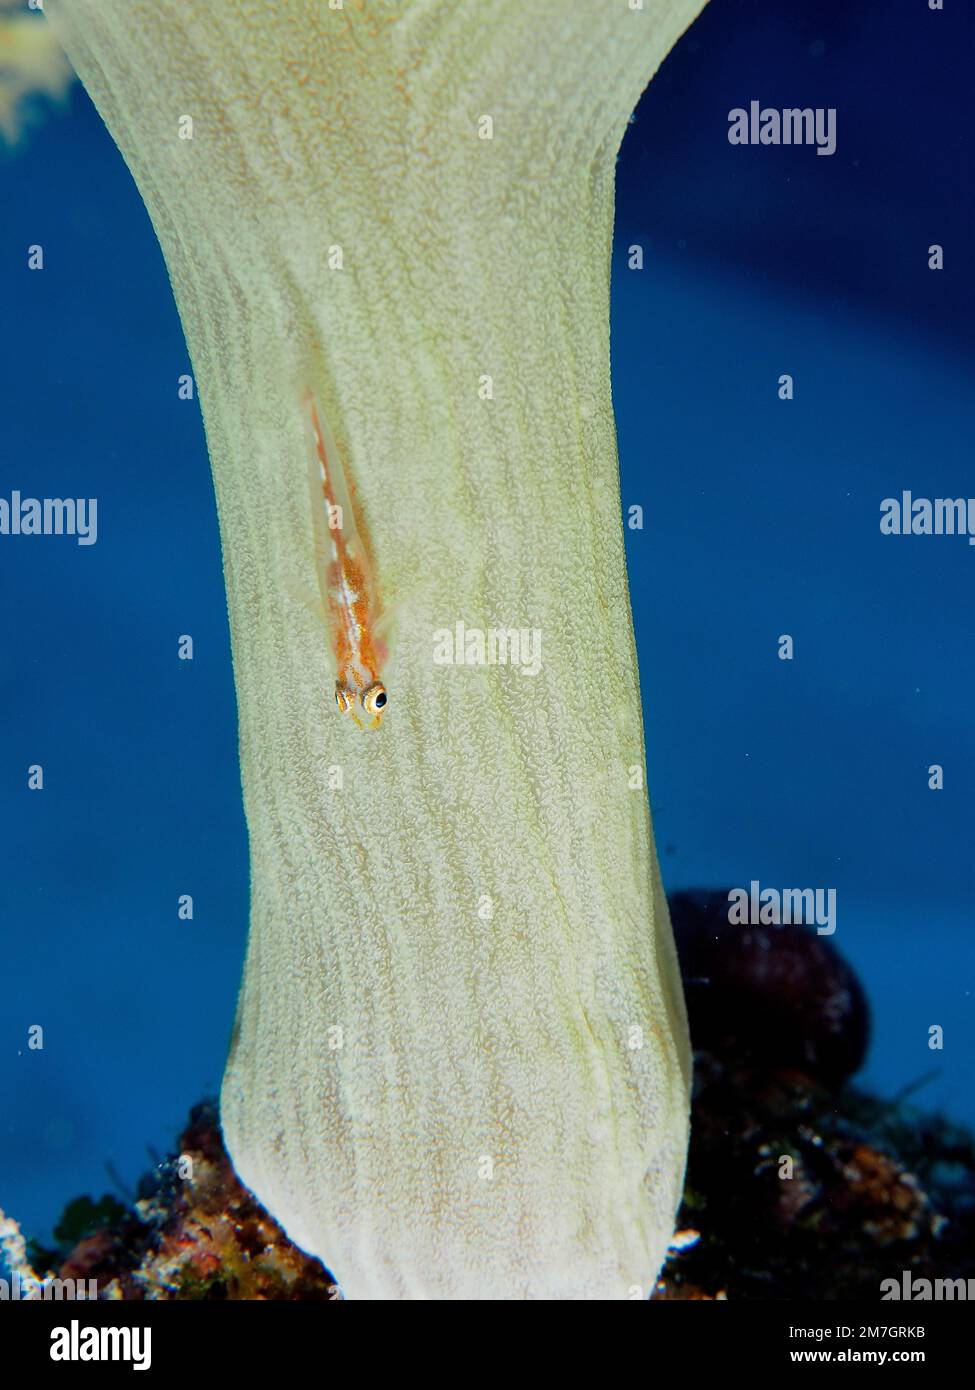 Mozambique toothy goby (Pleurosicya mossambica) on stem of broccoli tree (Litophyton arboreum) . Dive site Abu Fendera, Egypt, Red Sea Stock Photo